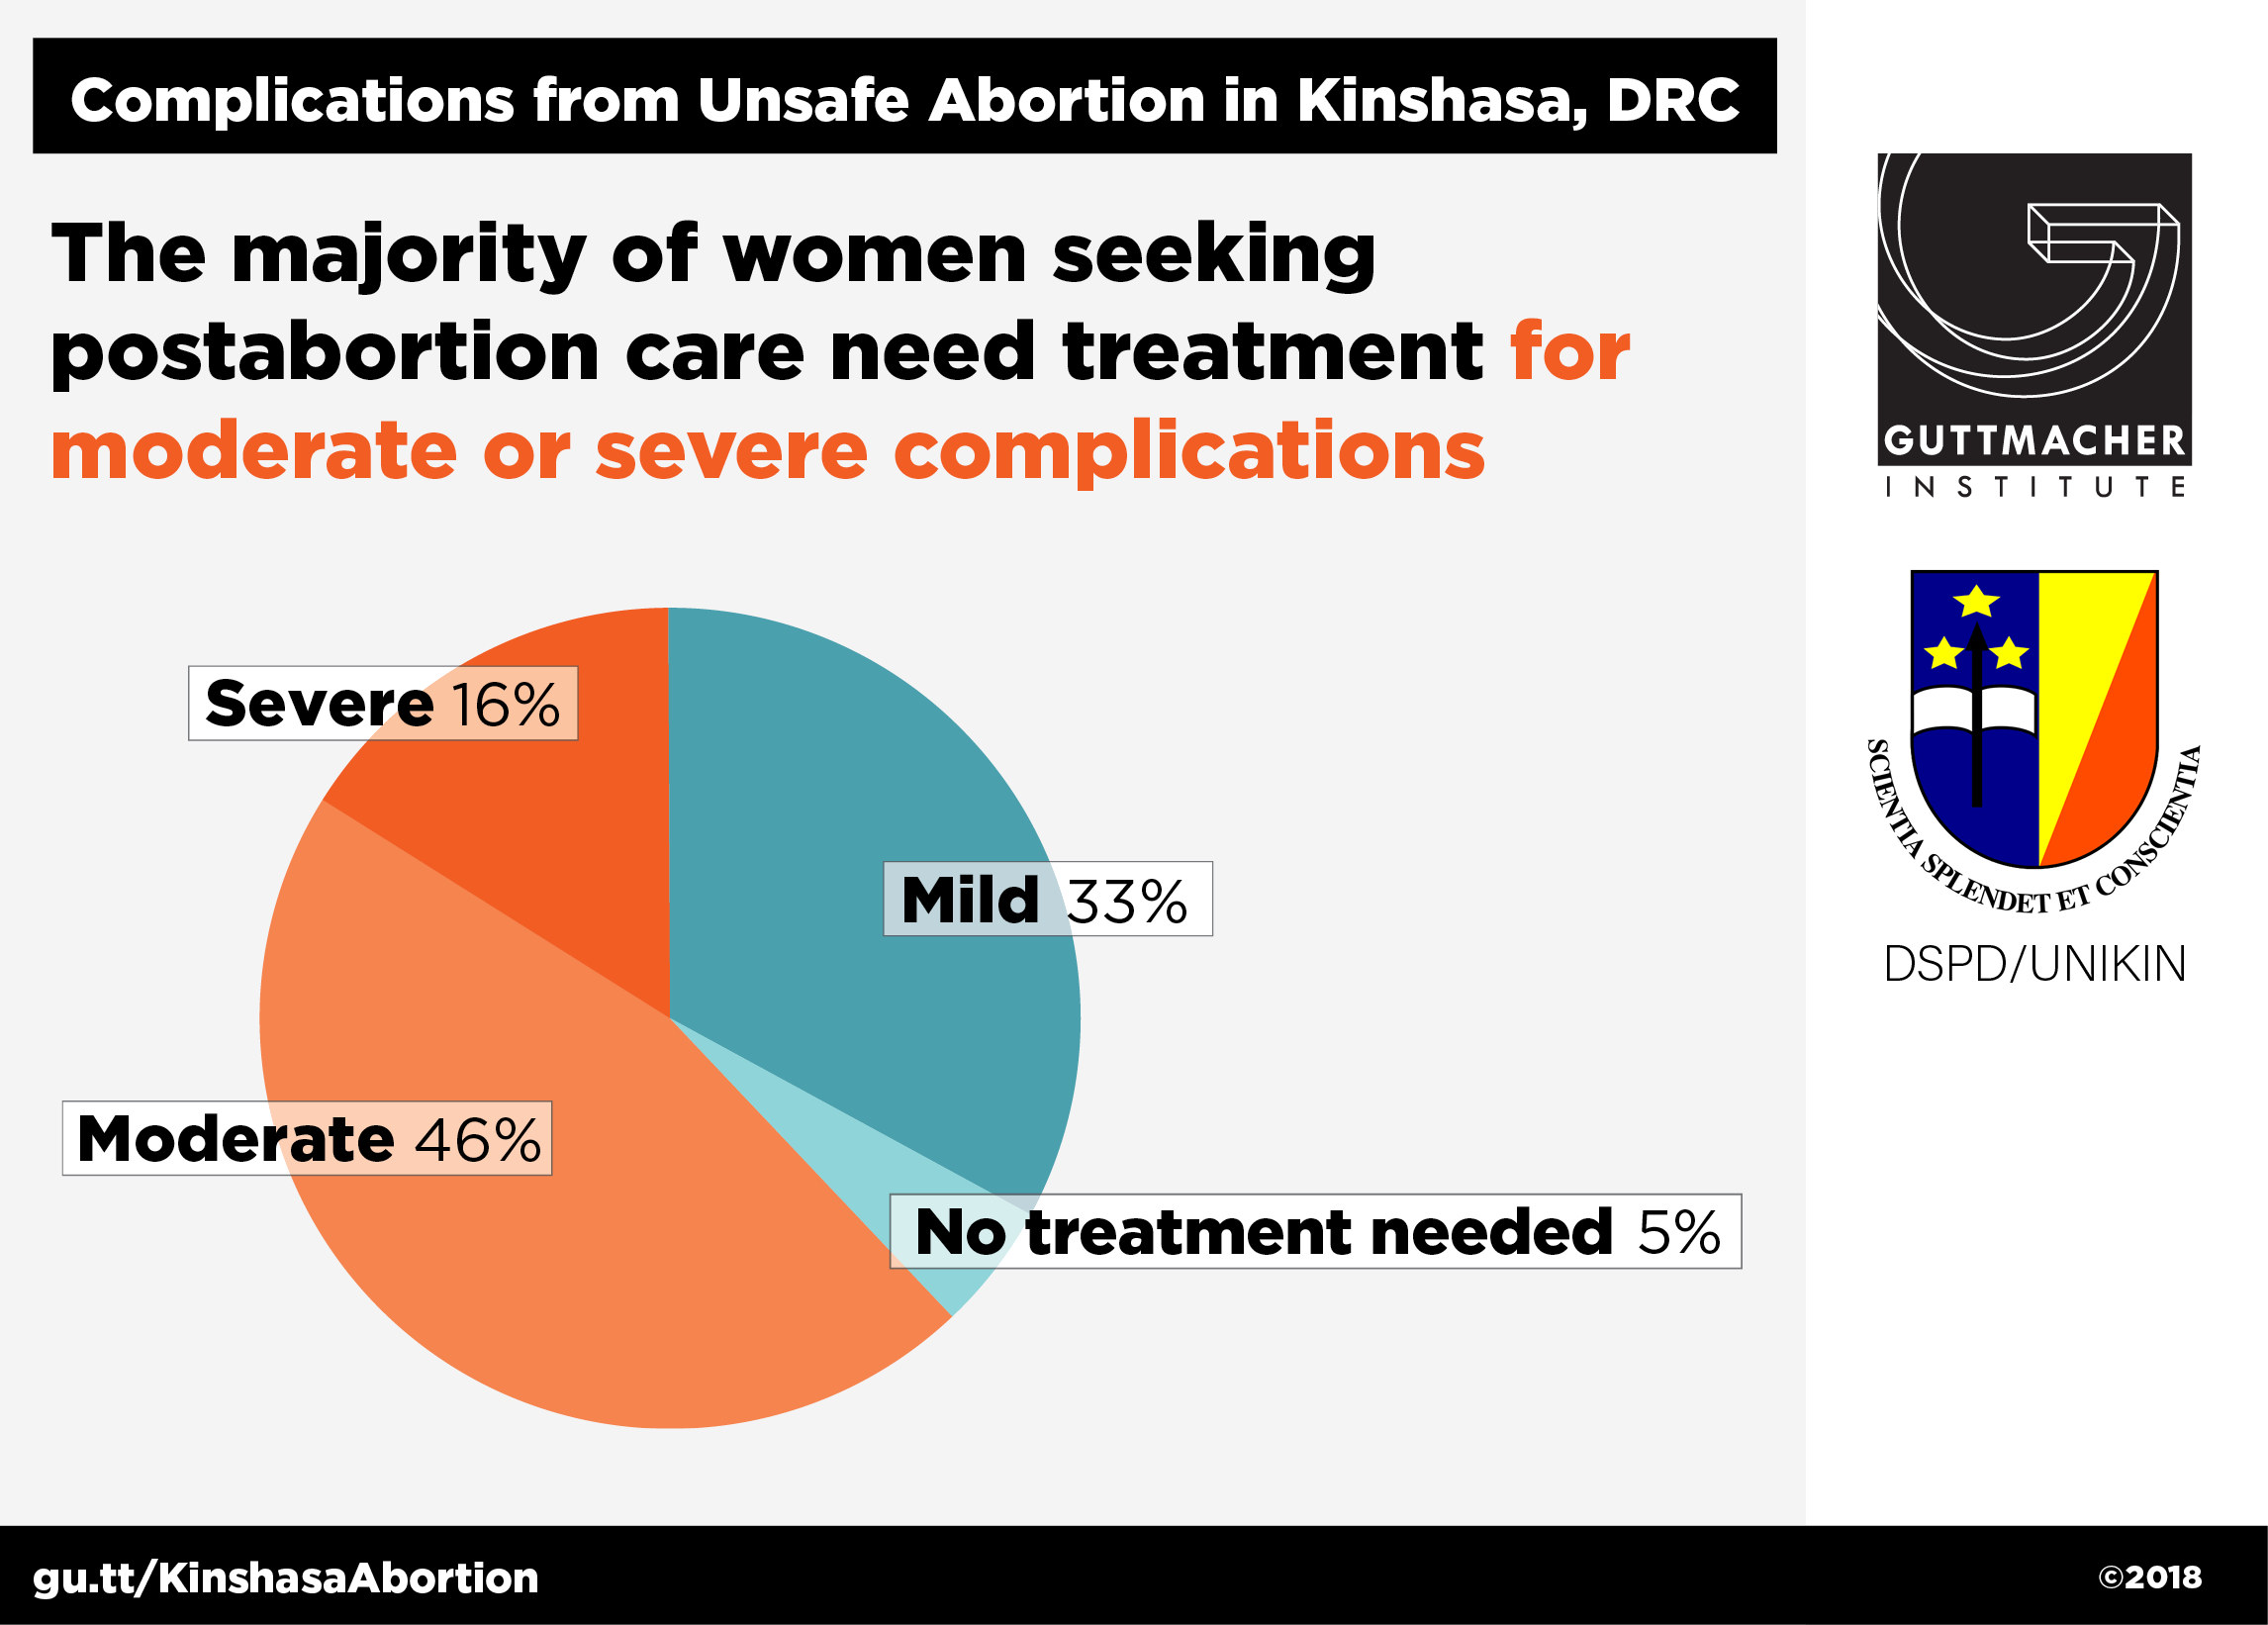 Pie chart showing the severity of complications from unsafe abortion in Kinshasa in 2016